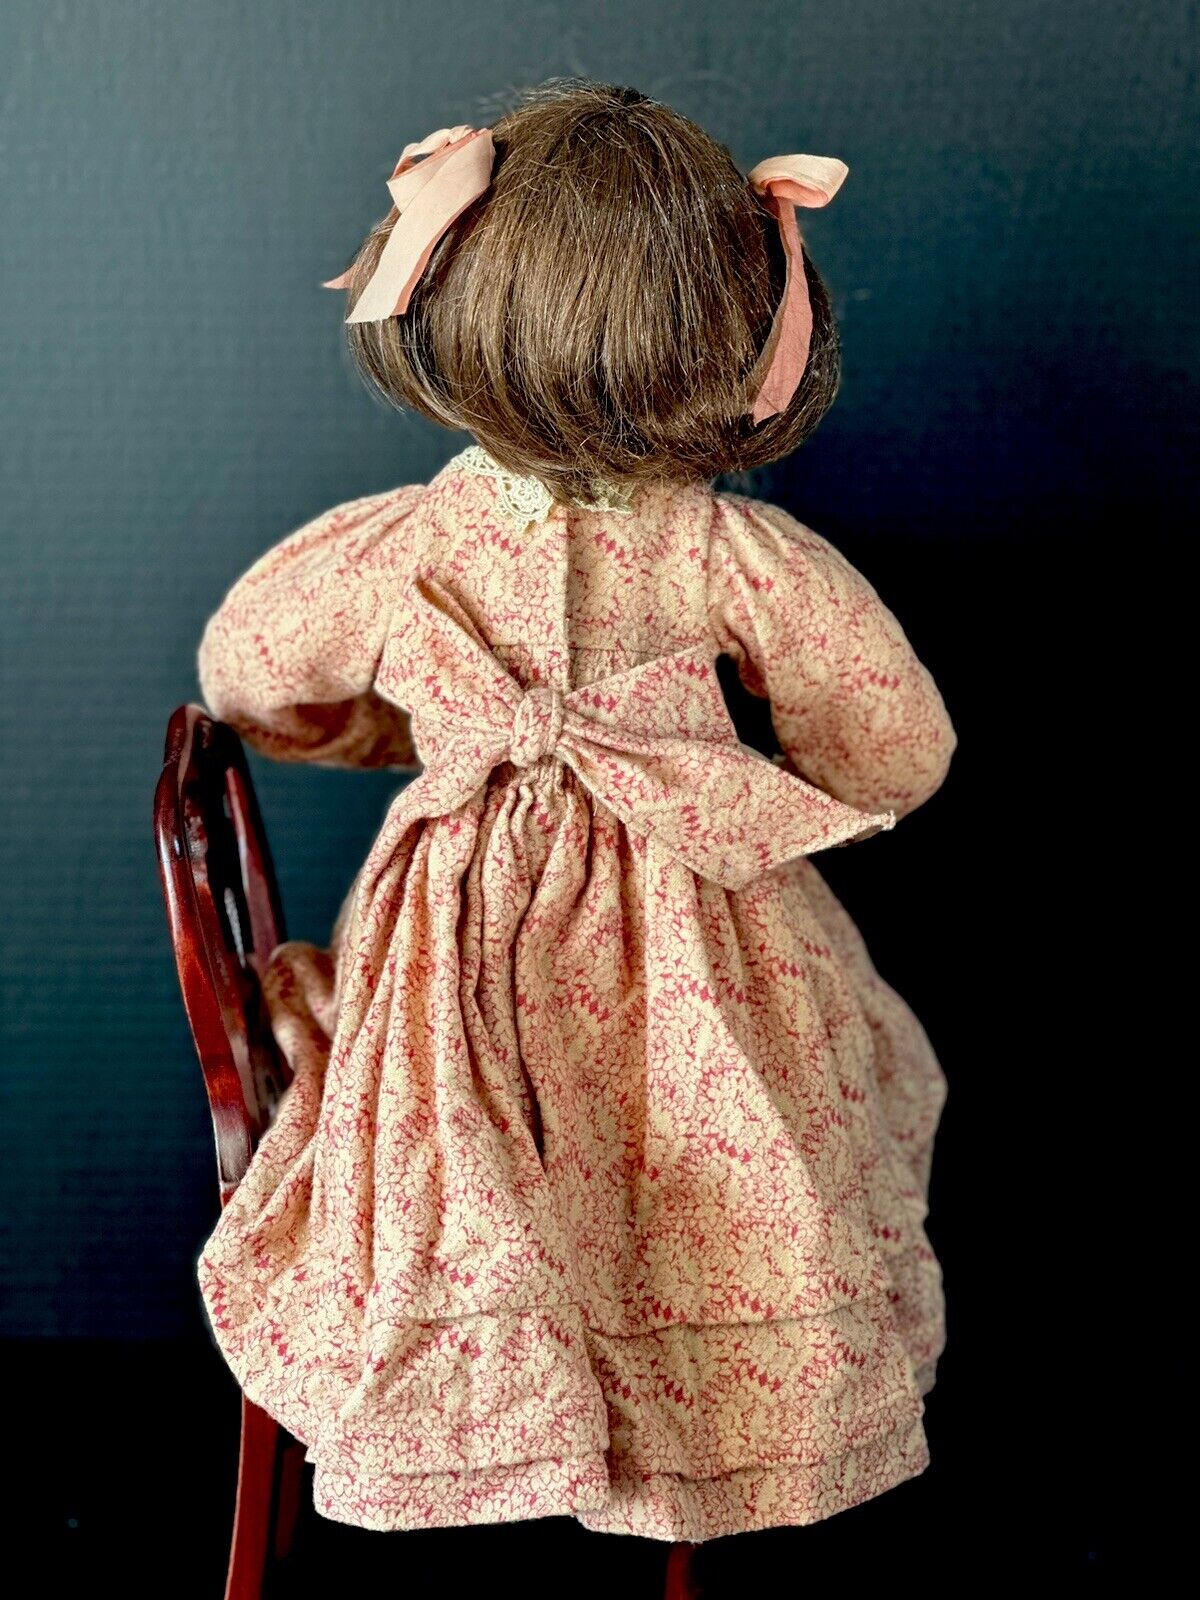 Collectible Porcelain Doll “Beth" By Jane Bradbury